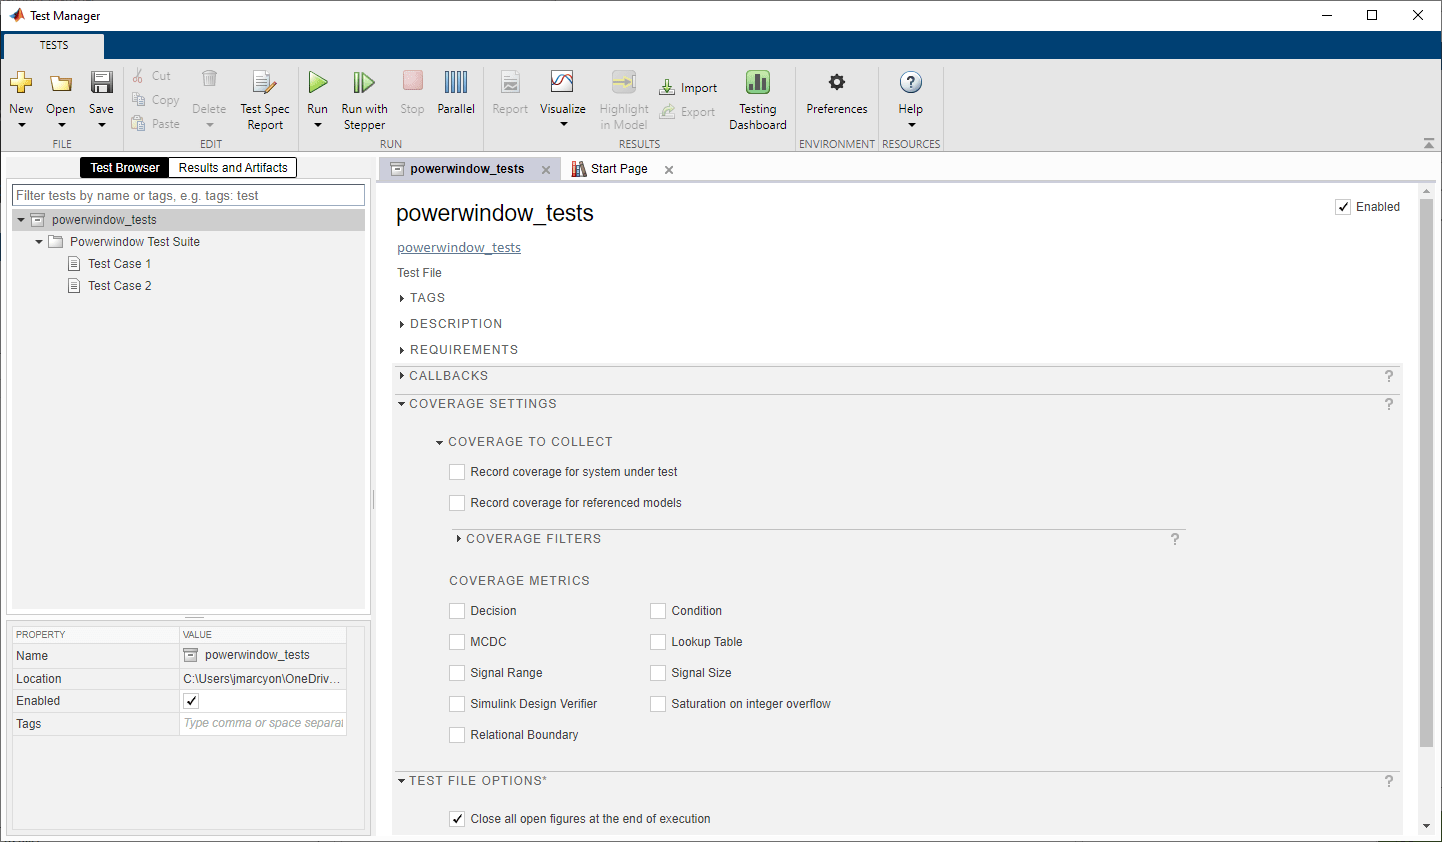 Simulink Test Manager showing an open test file, which contains one test suite titled Powerwindow Test Suite. The test suite contains two test cases.